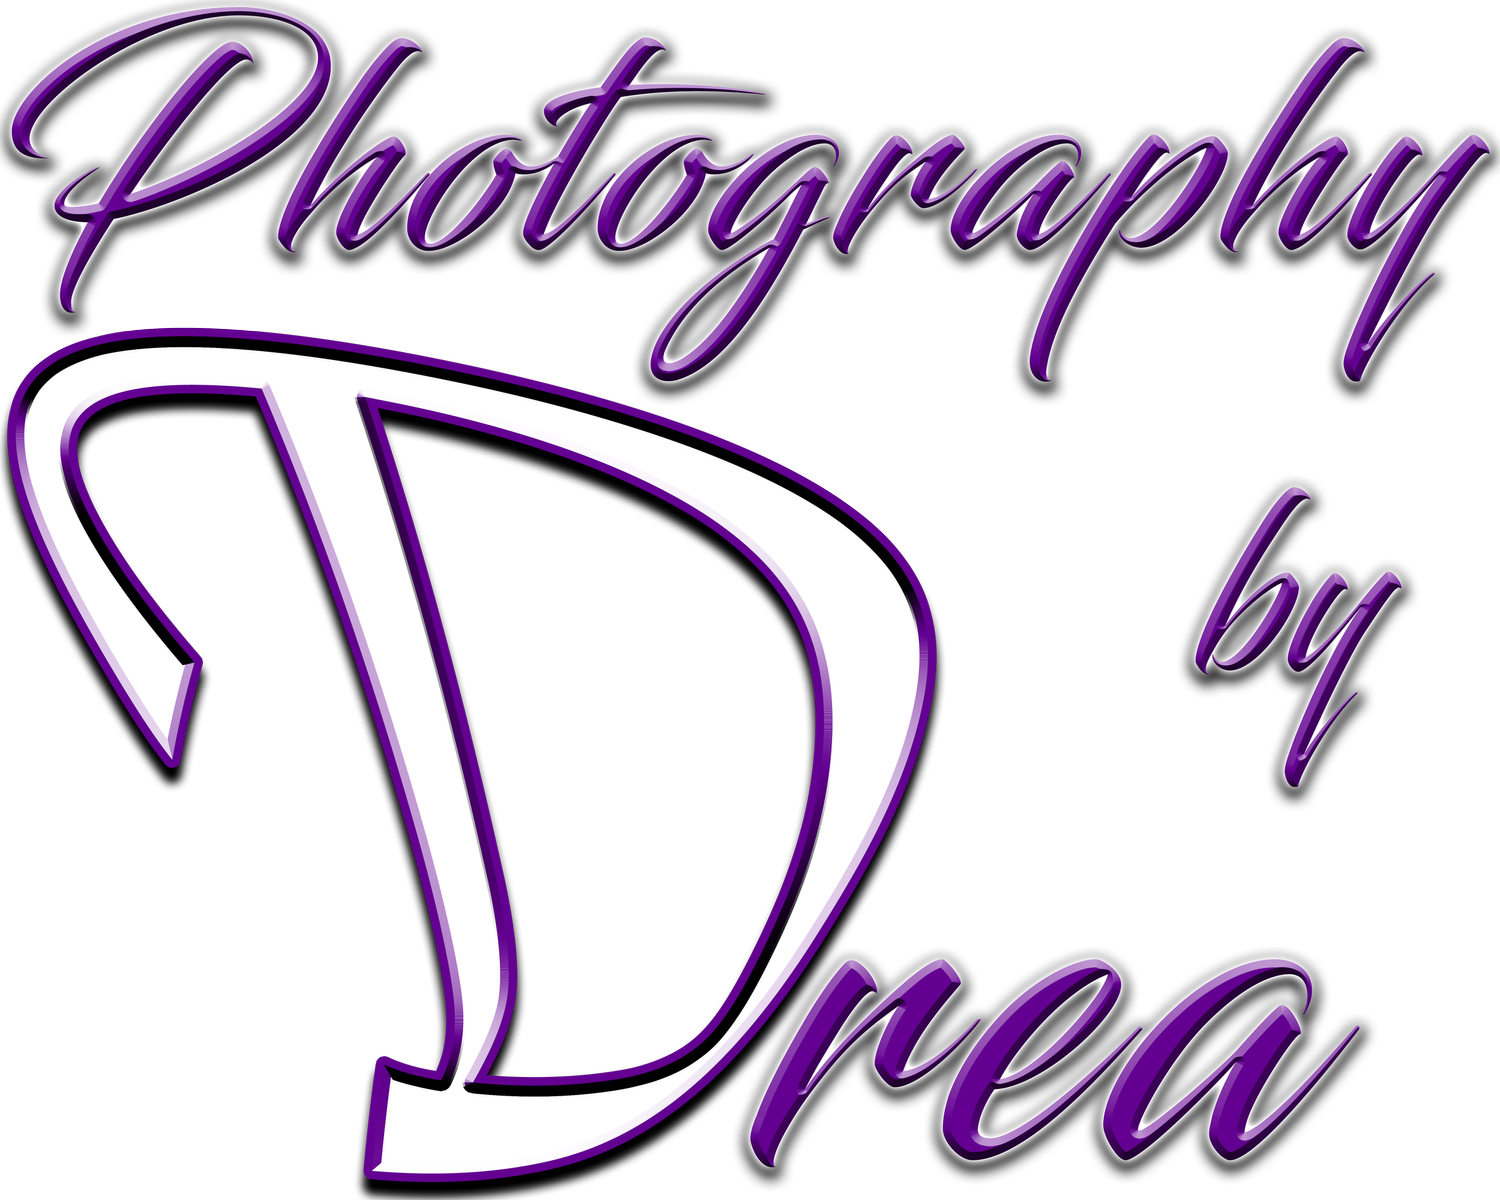 Photography by Drea